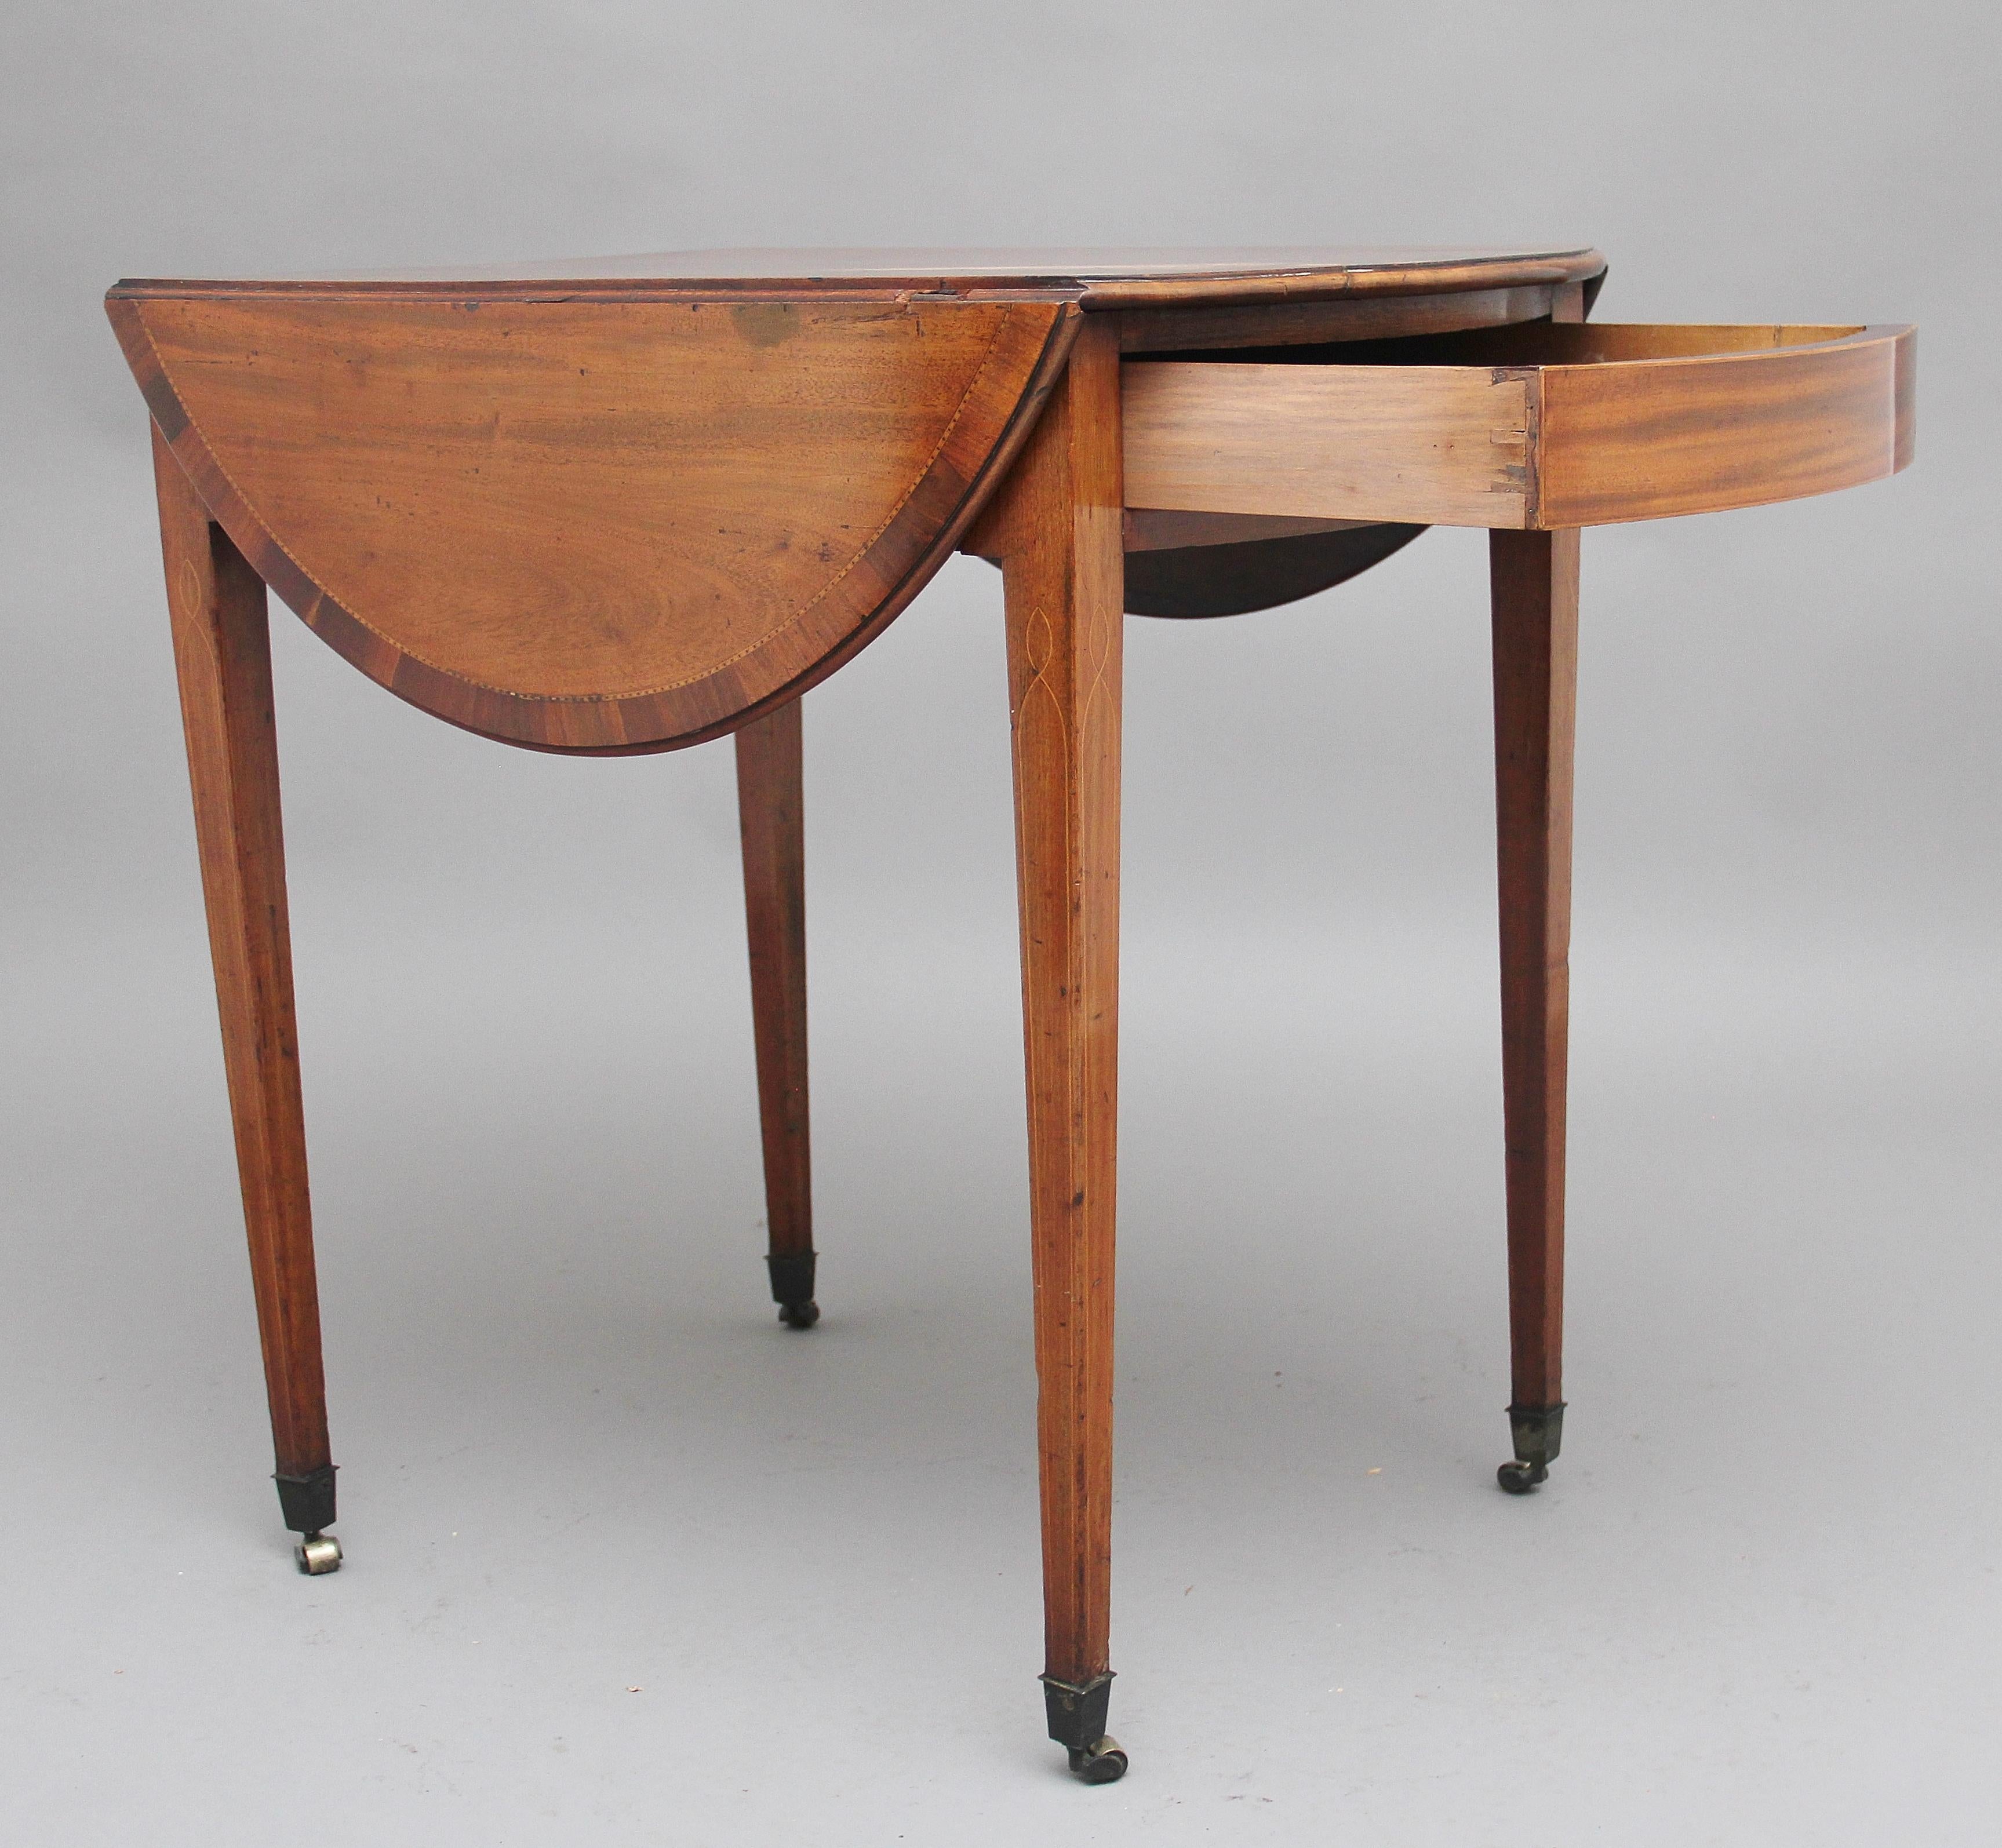 Early 19th century mahogany Pembroke table, the moulded edge oval top crossbanded and decorated with chequered inlay, with the top also having a nice figuration and lovely color, having a single drawer at one end, supported on square tapering legs